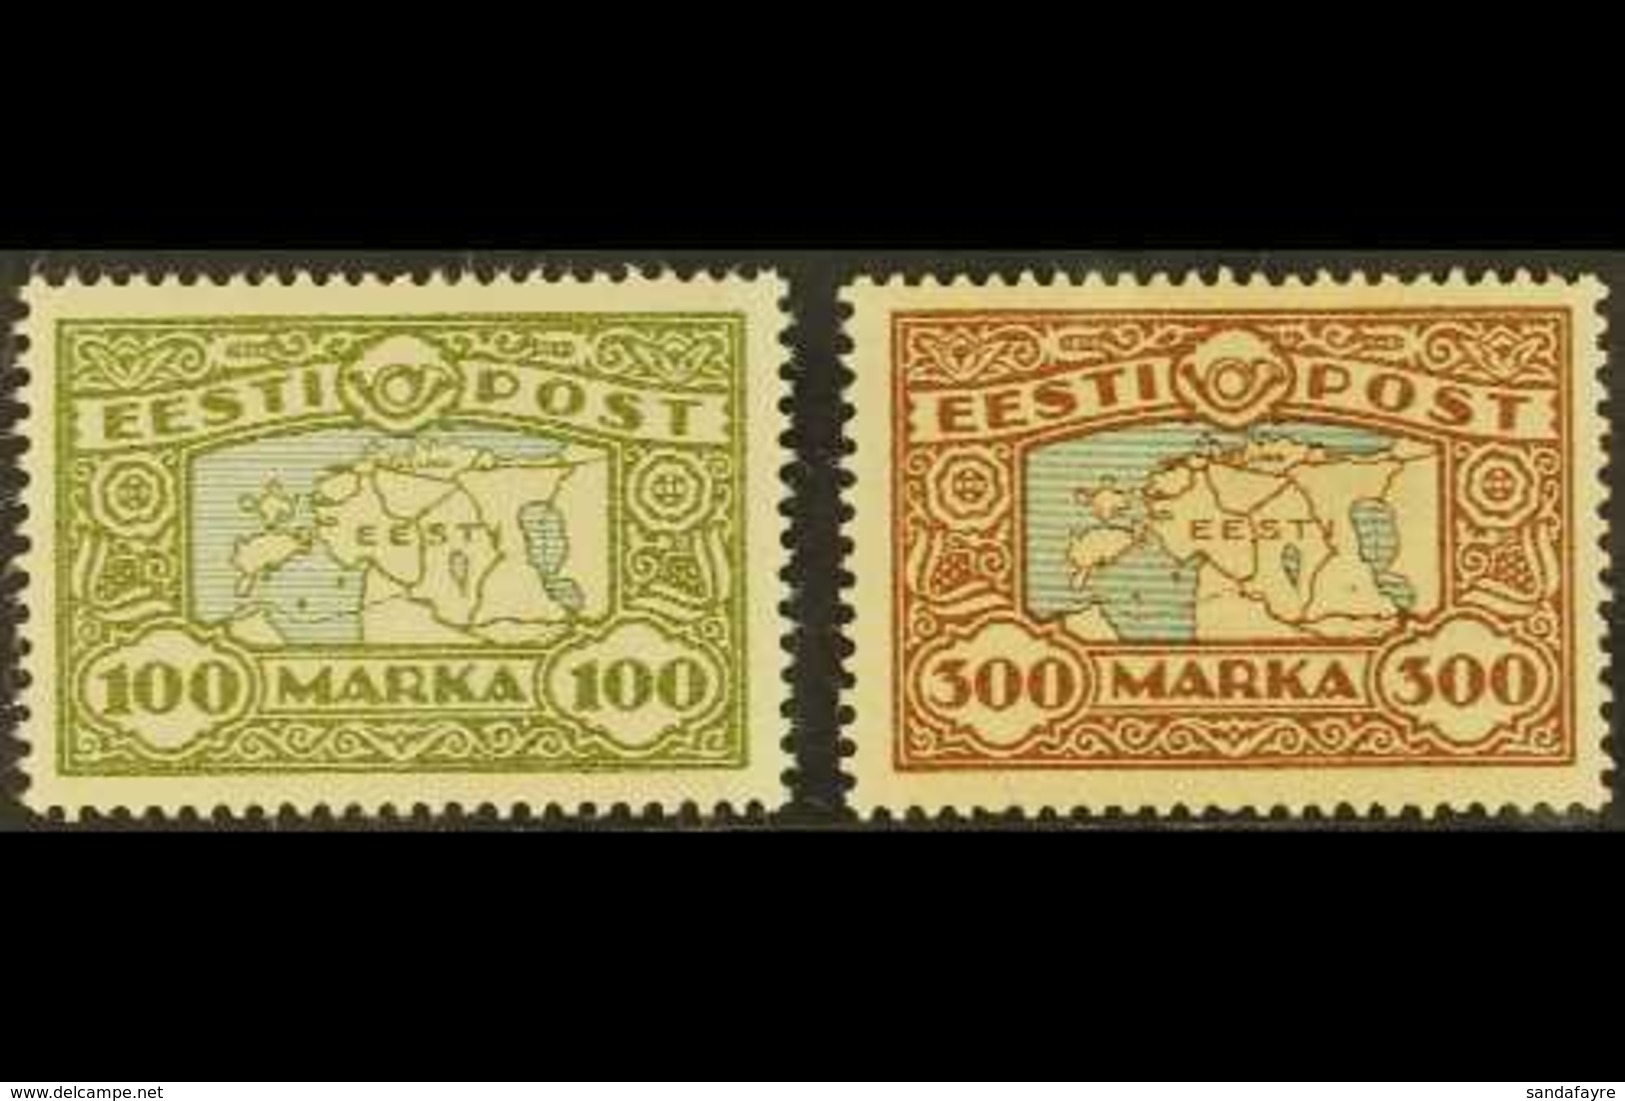 1923-24 Map Complete Set (SG 43/43a, Michel 40 & 54), Very Fine Mint, Very Fresh. (2 Stamps) For More Images, Please Vis - Estland